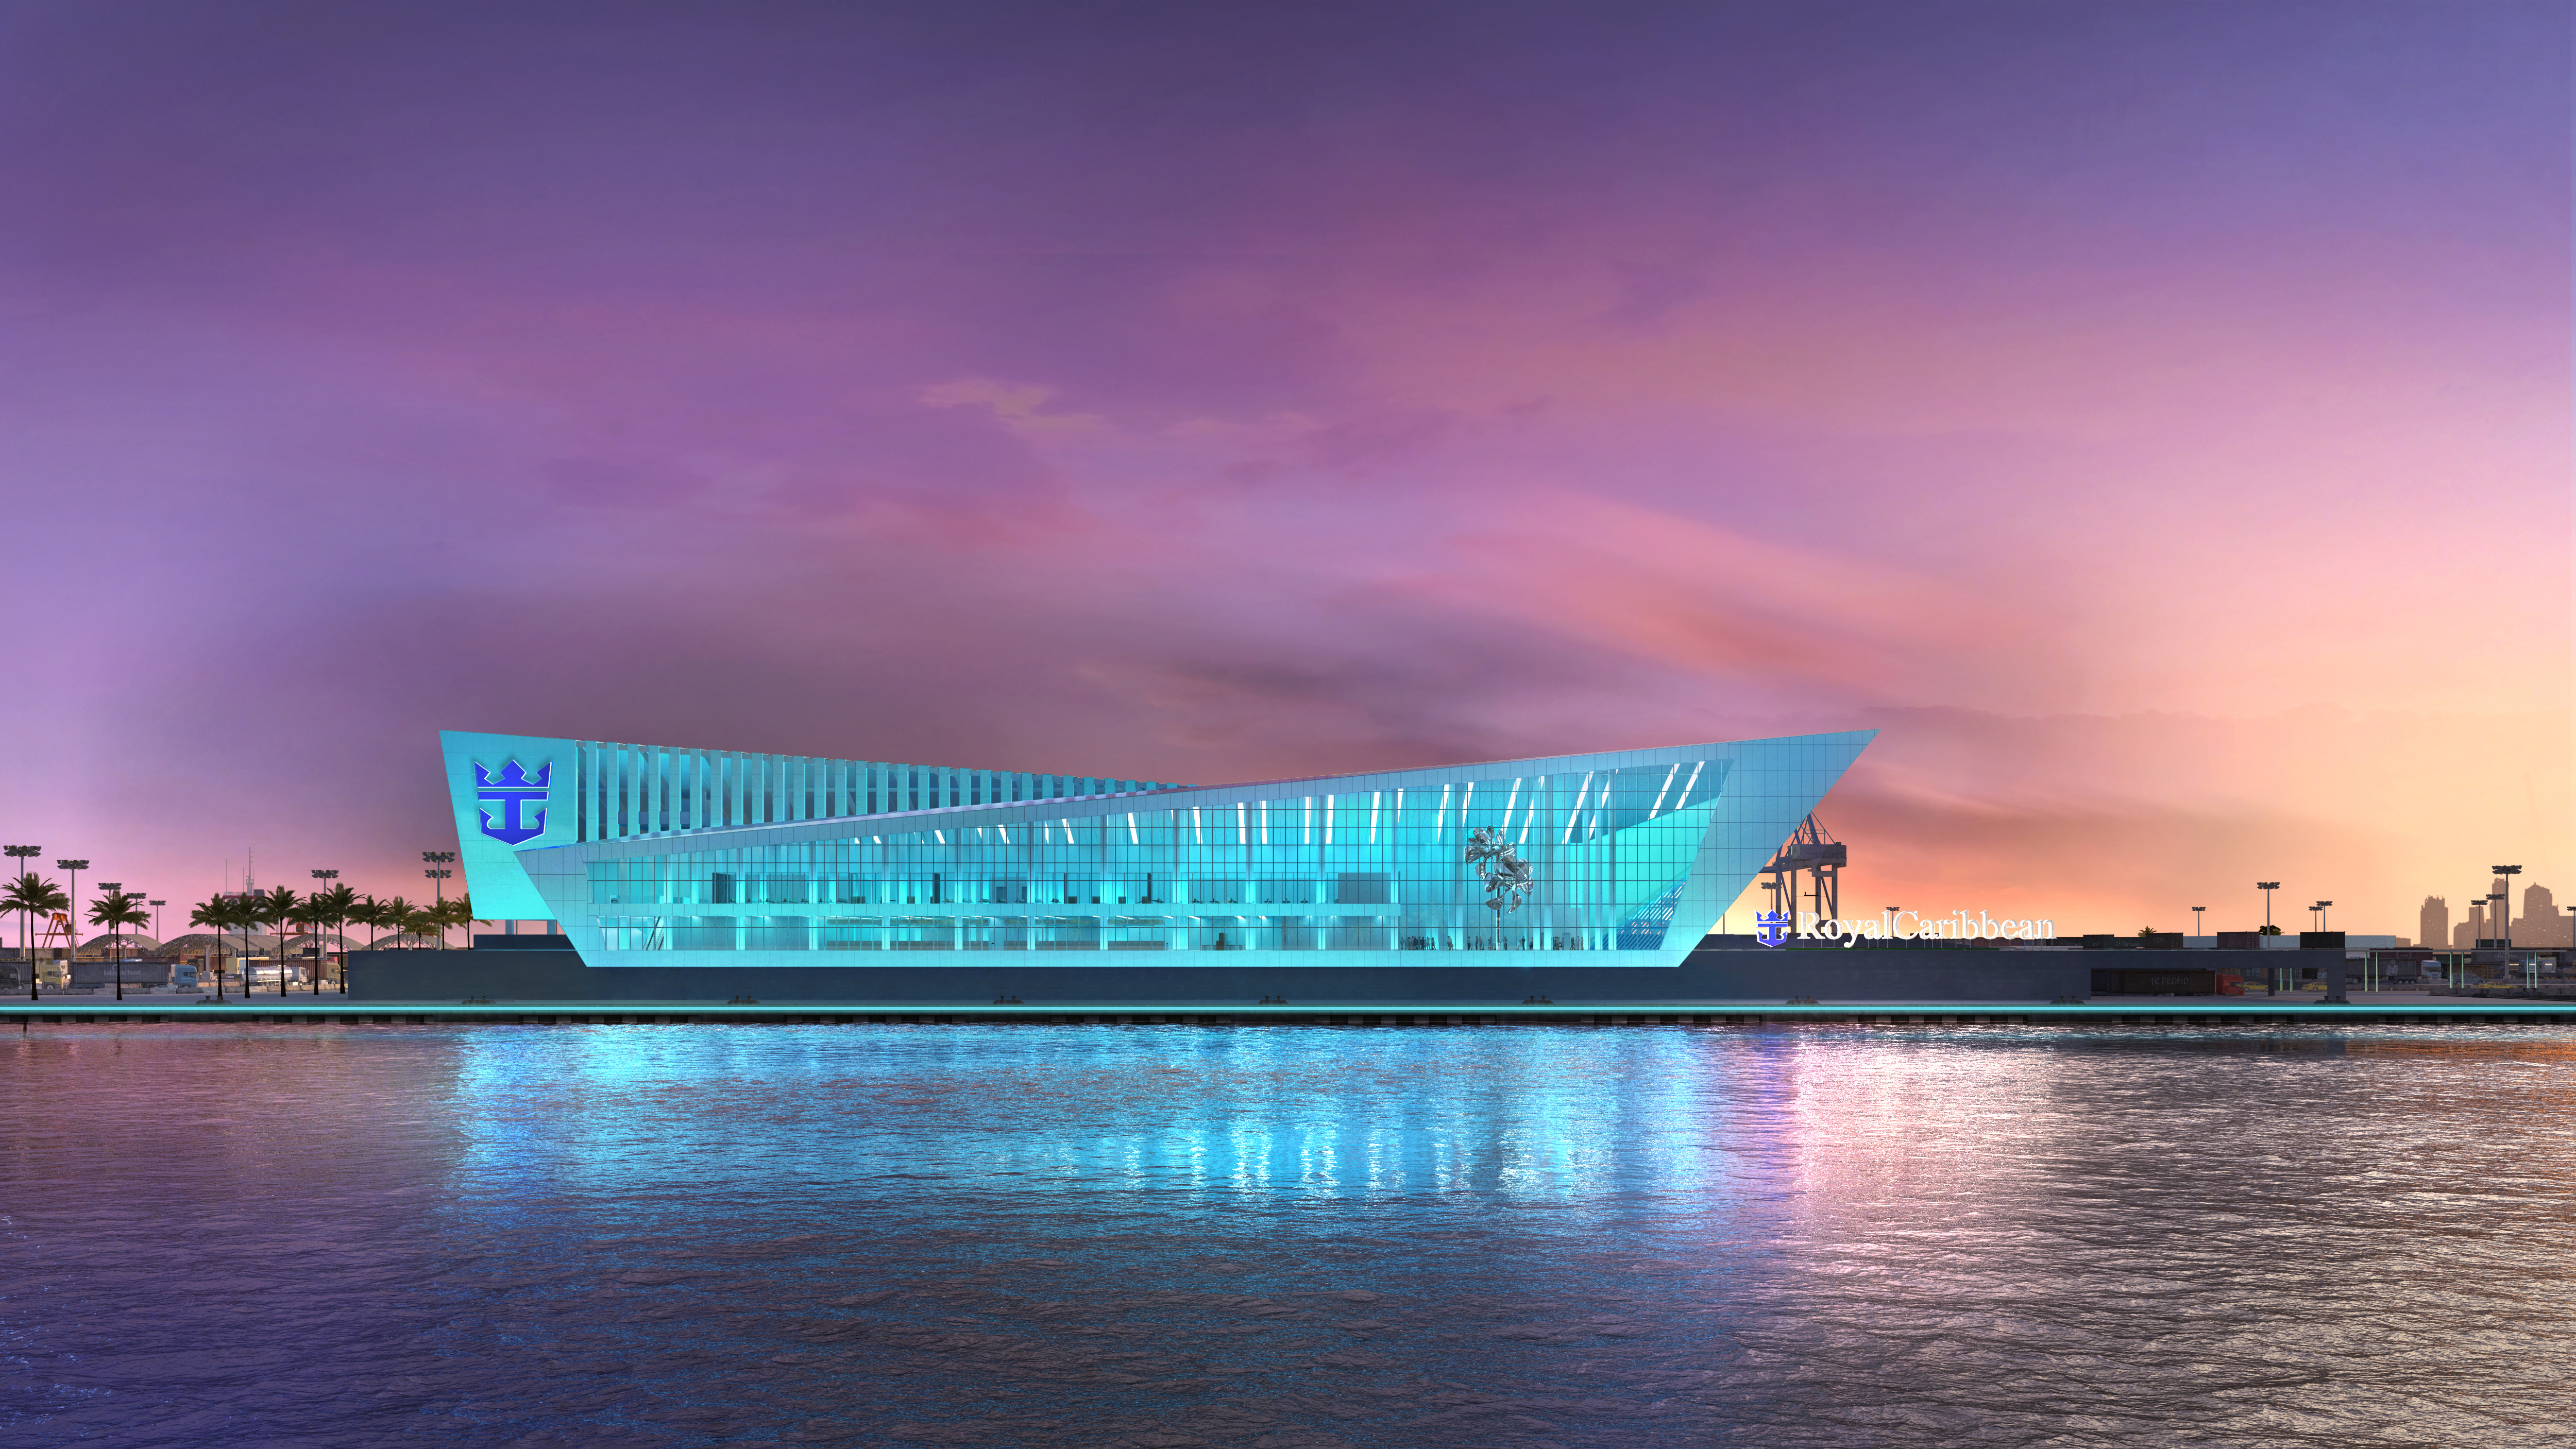 The new terminal for cruise ships in Miami known as Crown of Miami